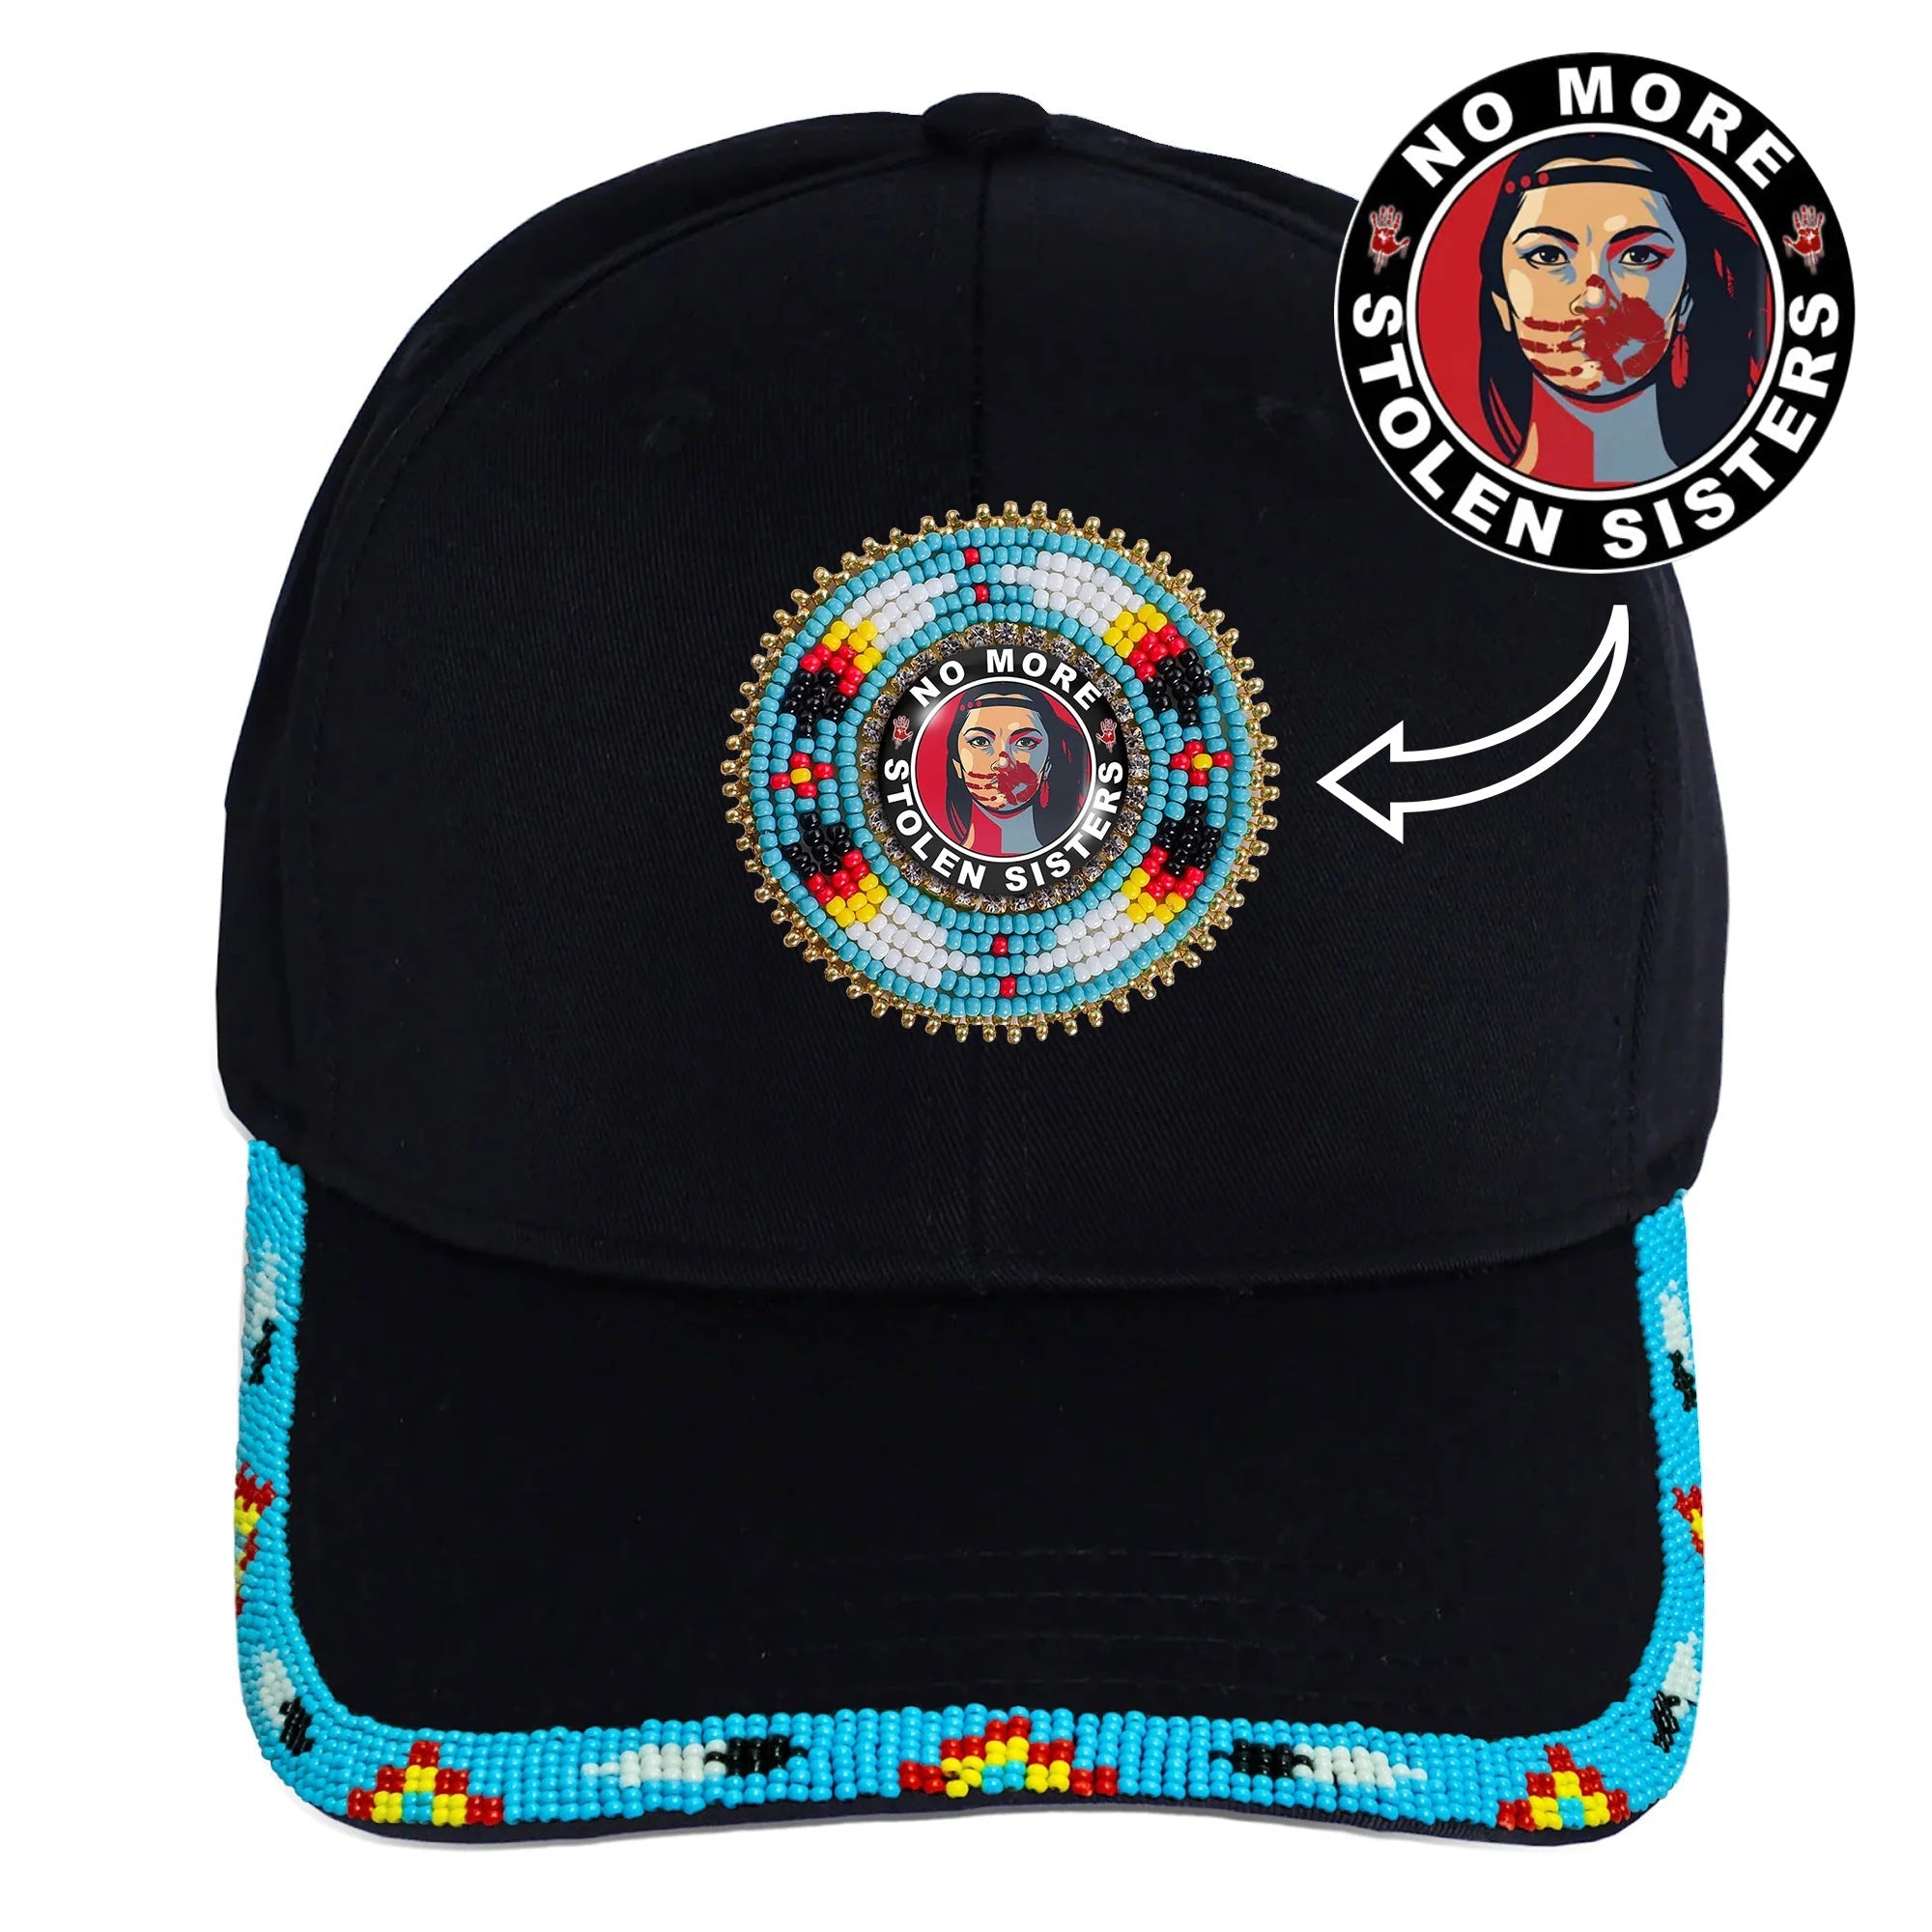 Mo More Stolen Sister  Baseball Cap With Patch And brim Cotton Unisex Native American Style